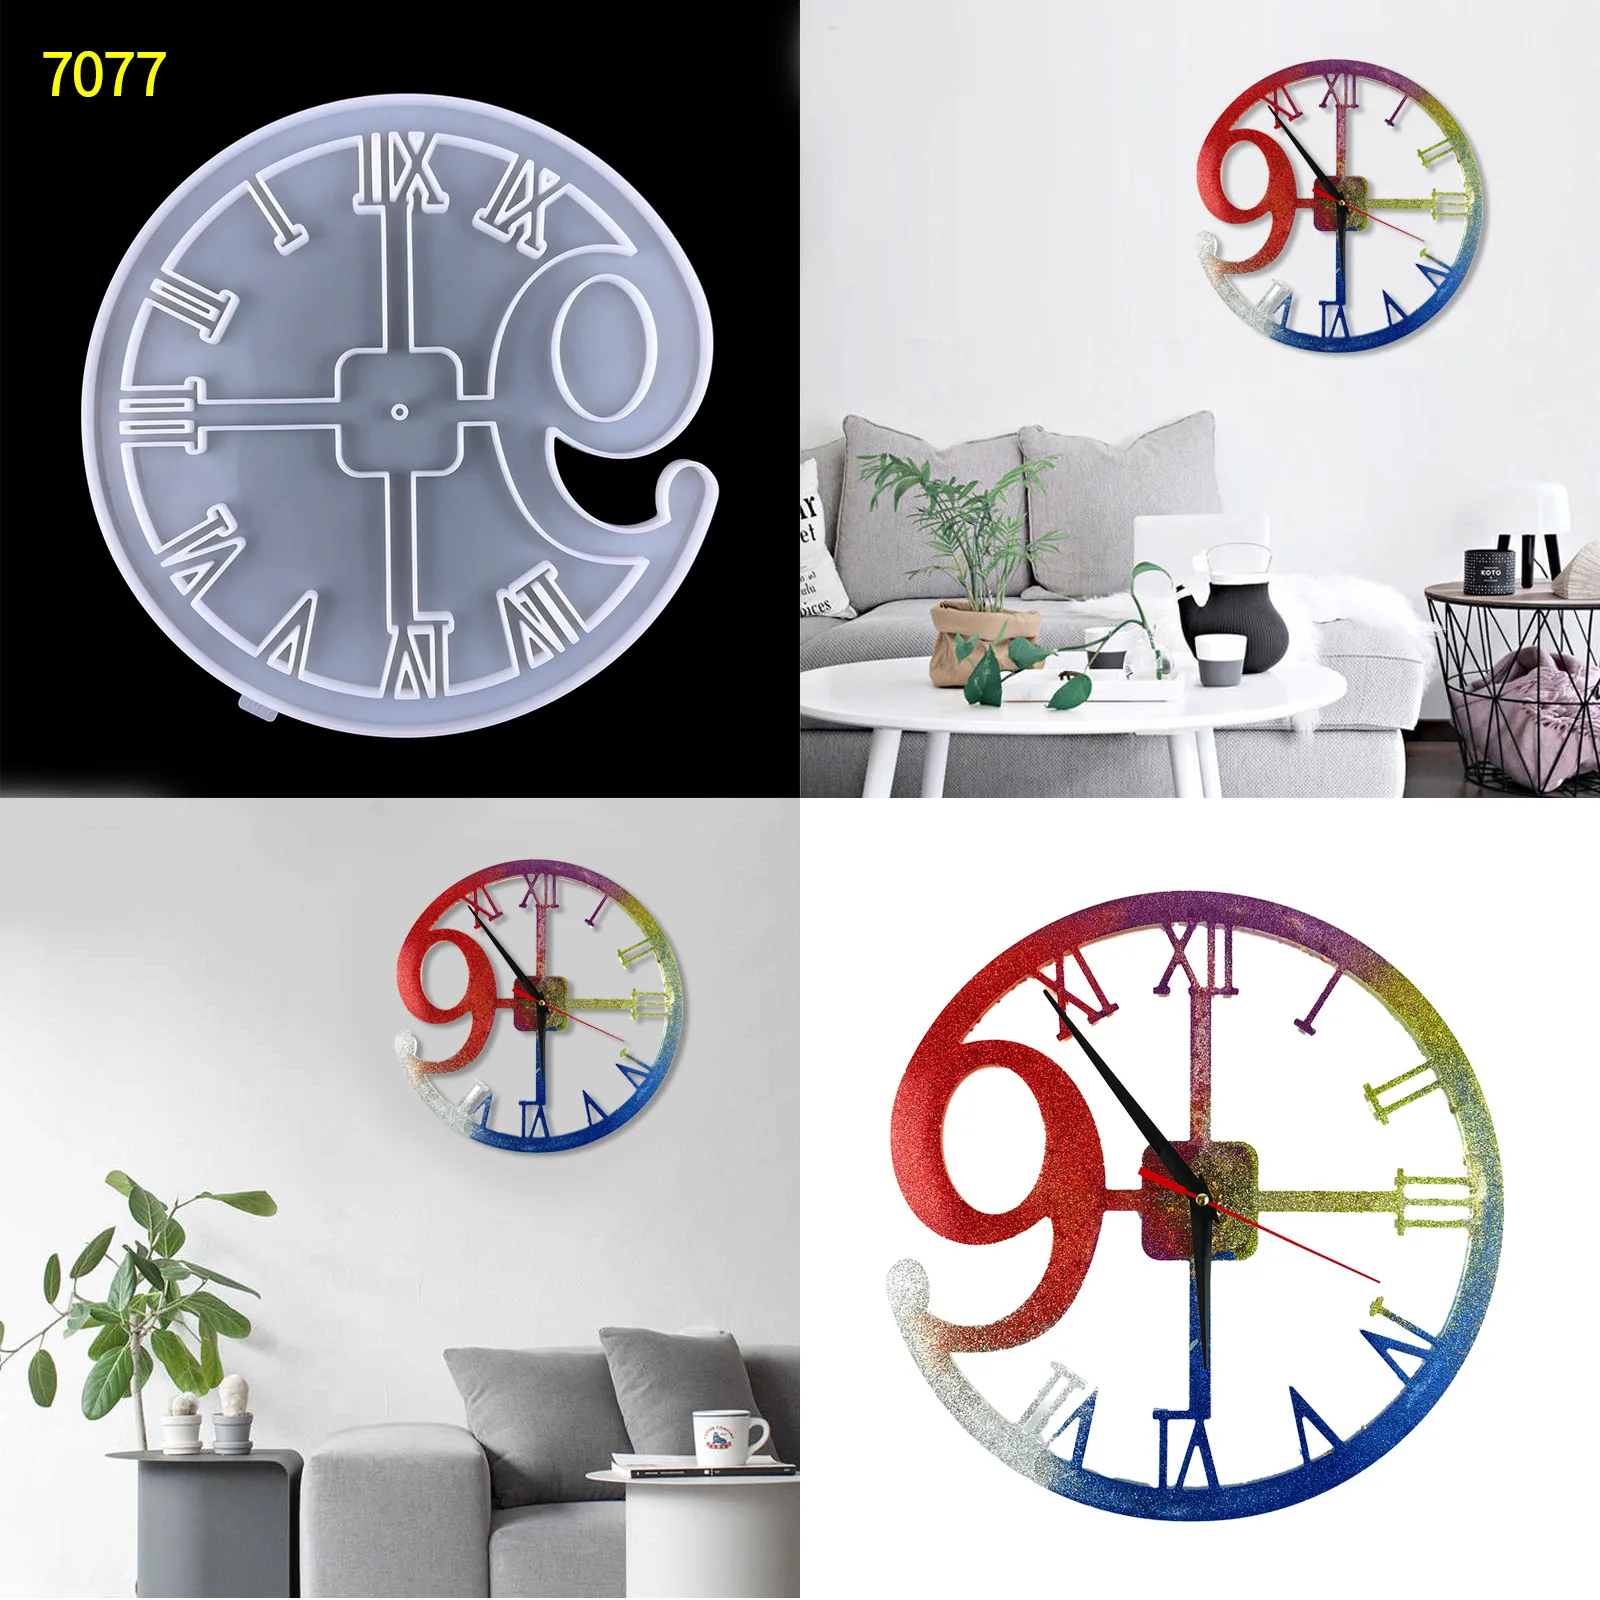 Clock Wall Hanging Silicone Mold DIY Round Hollow Digital Clock Pendant Wall Decoration Clock Silicone Mould For Resin Making diy crystal silicone mold oversized round clock dial ornament wall hanging home decoration silicone resin mold handmade art mold